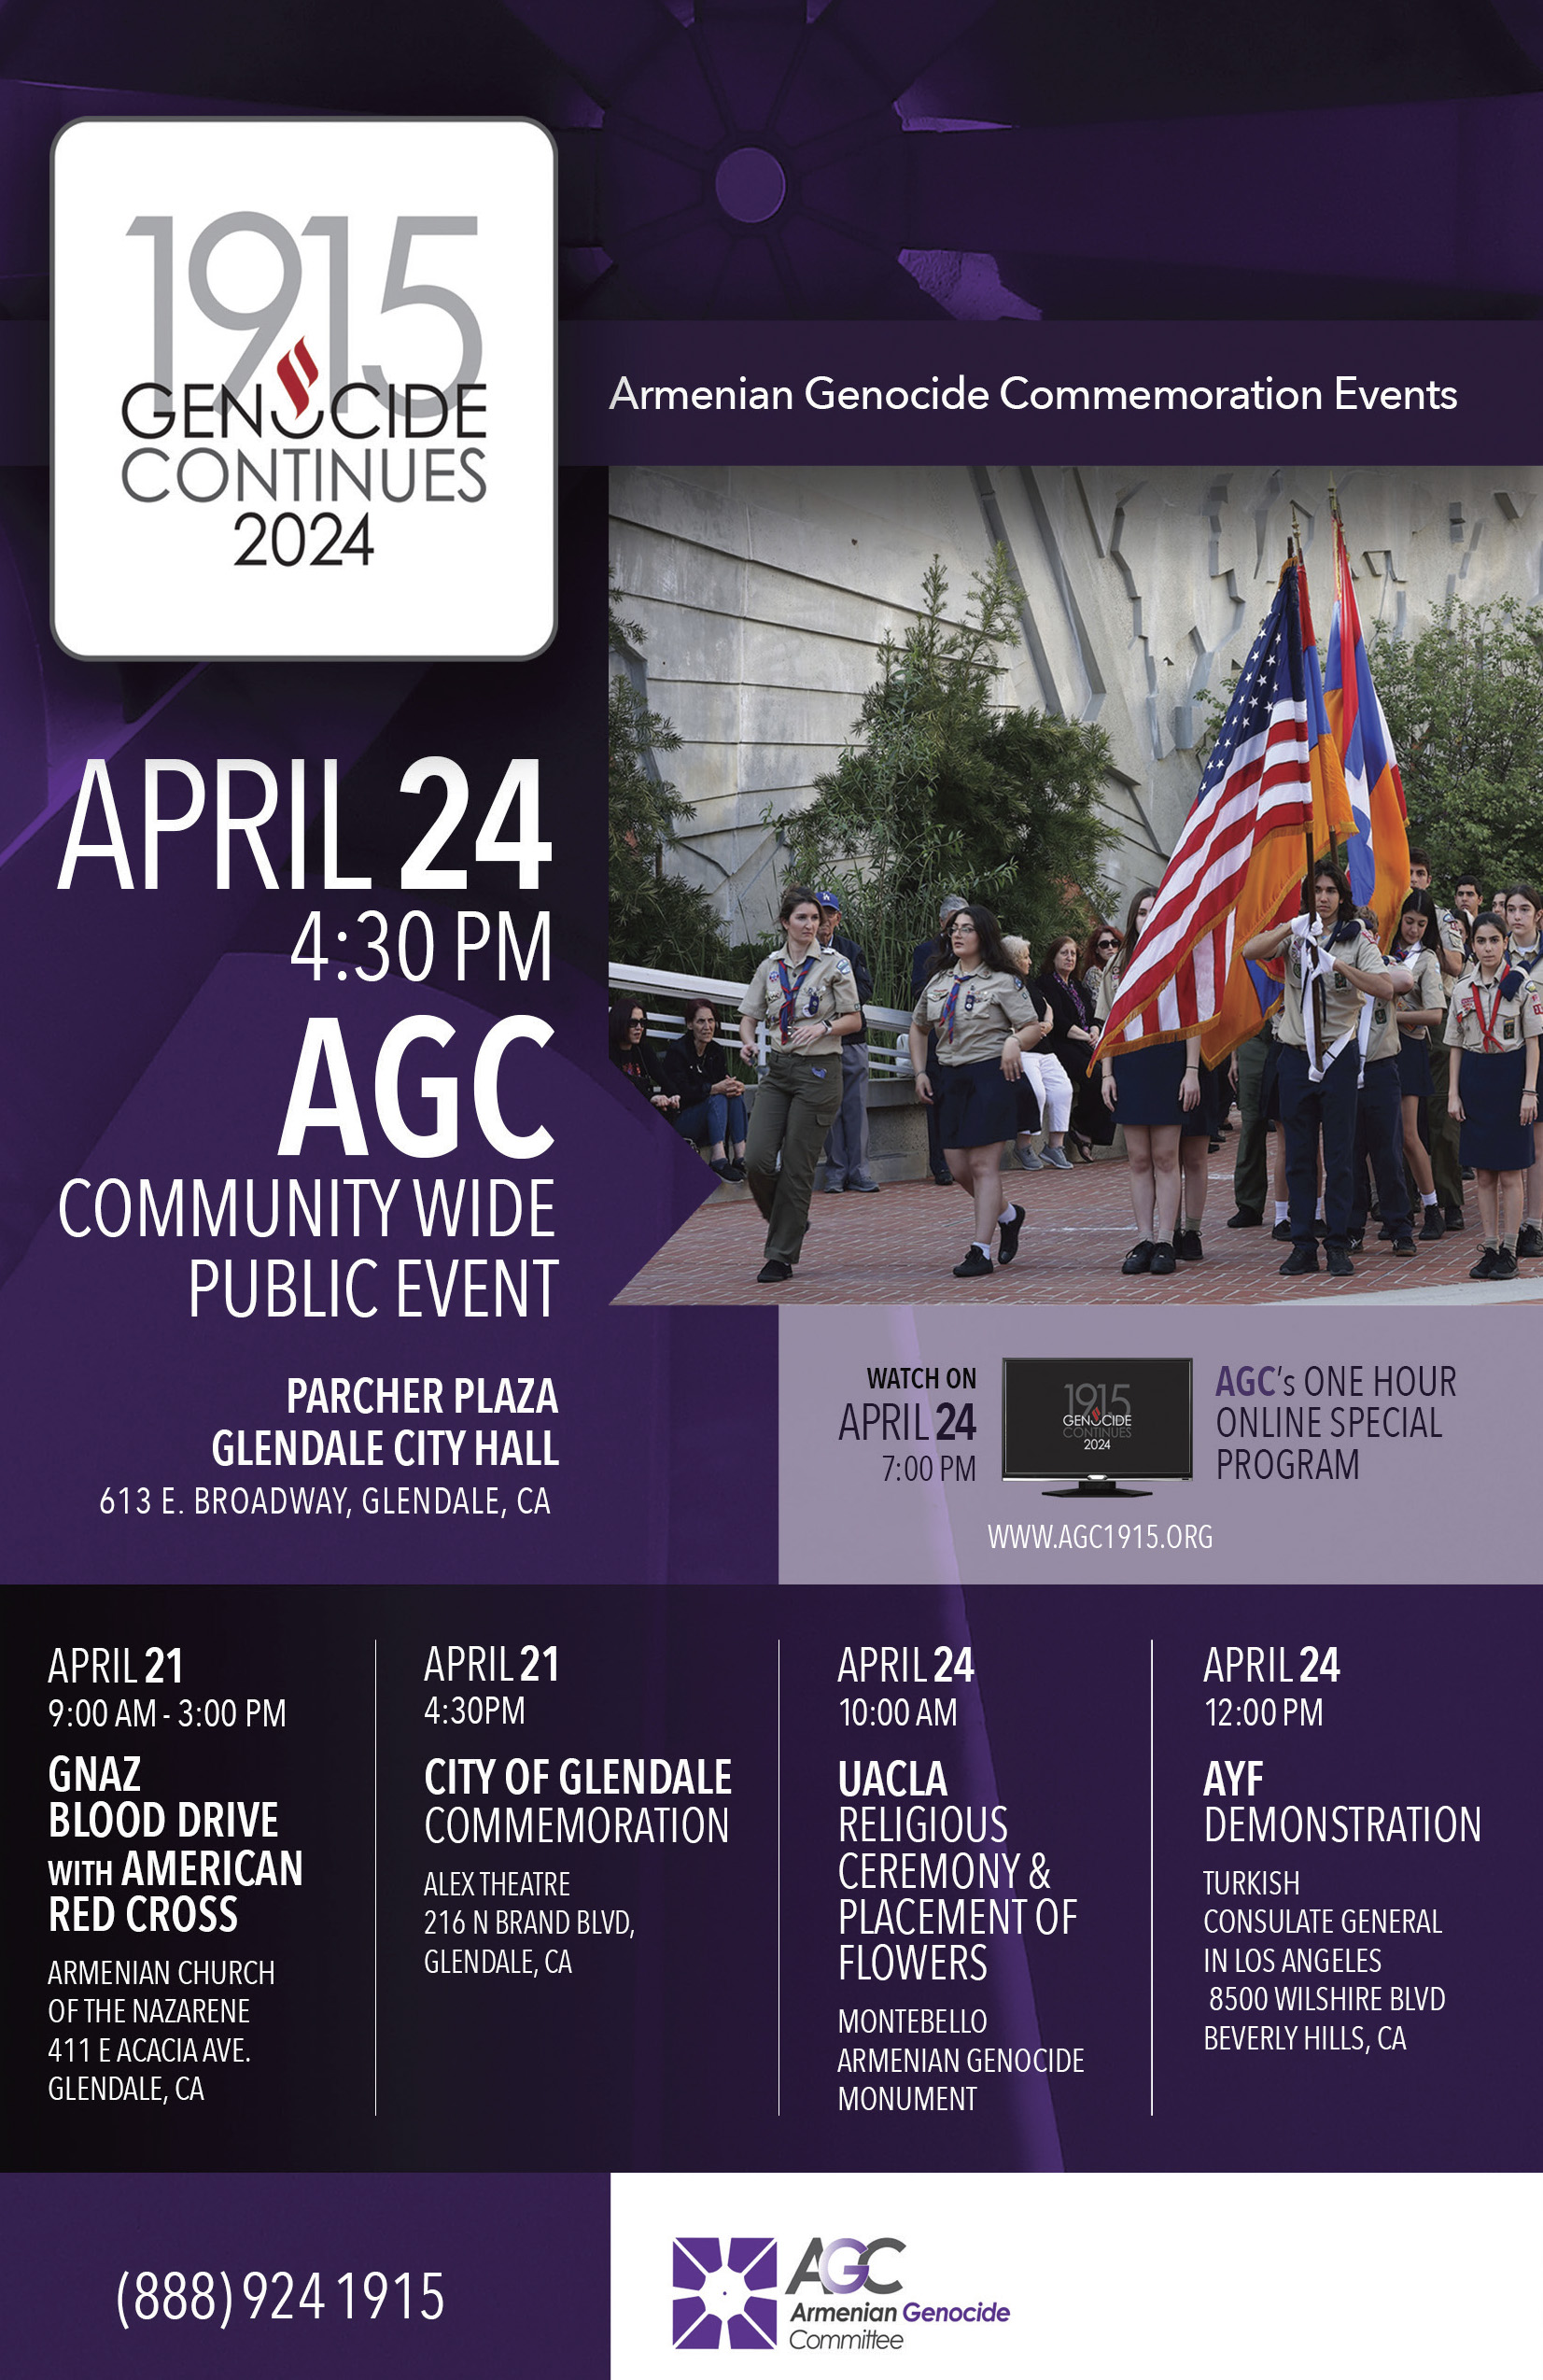 Armenian Genocide Committee Announces 109th Anniversary Commemoration Events